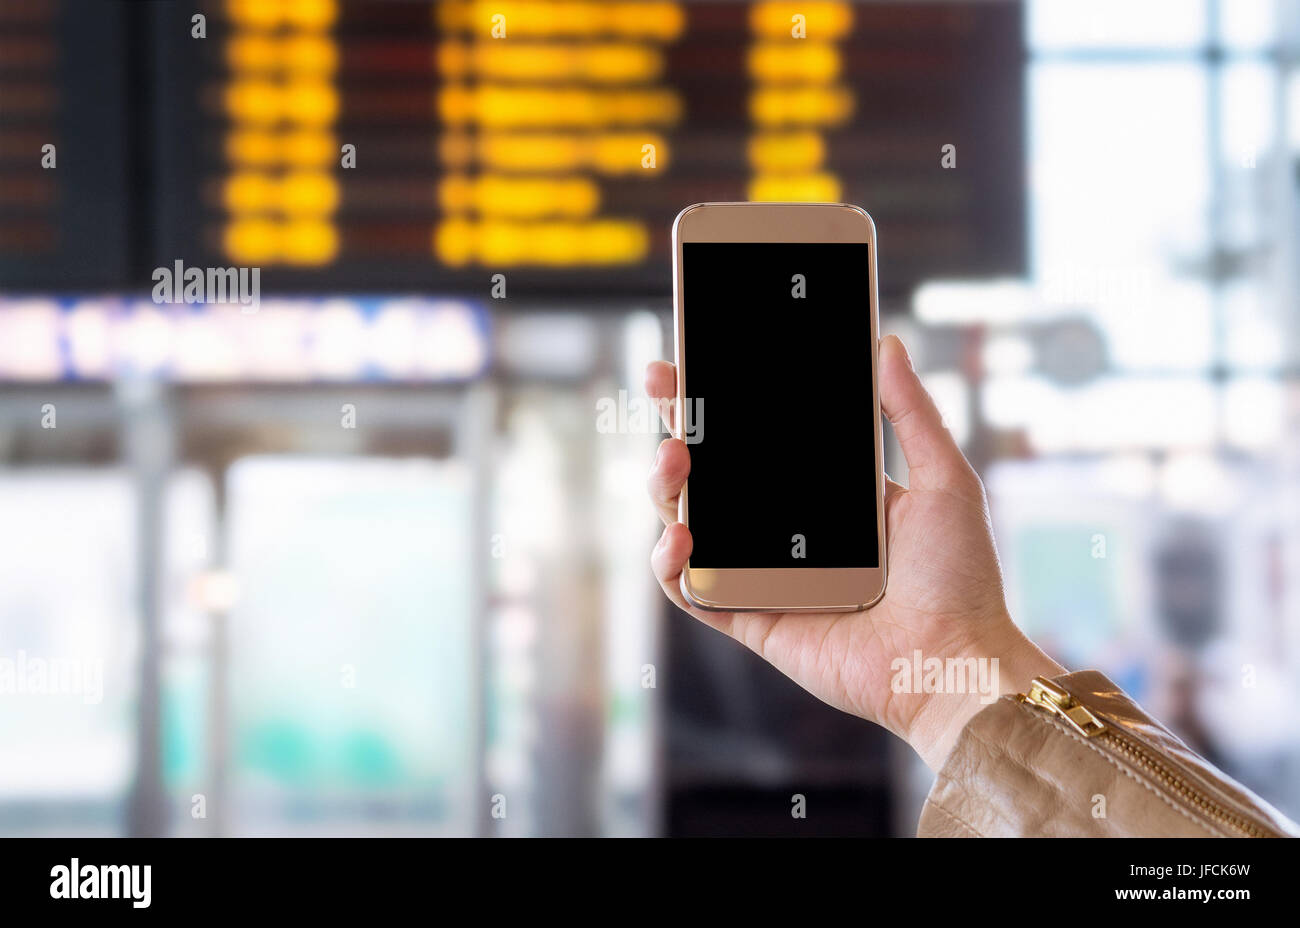 Smartphone with blank screen in bus, train, metro, subway or underground station or airport. Universal public transportation terminal. Stock Photo